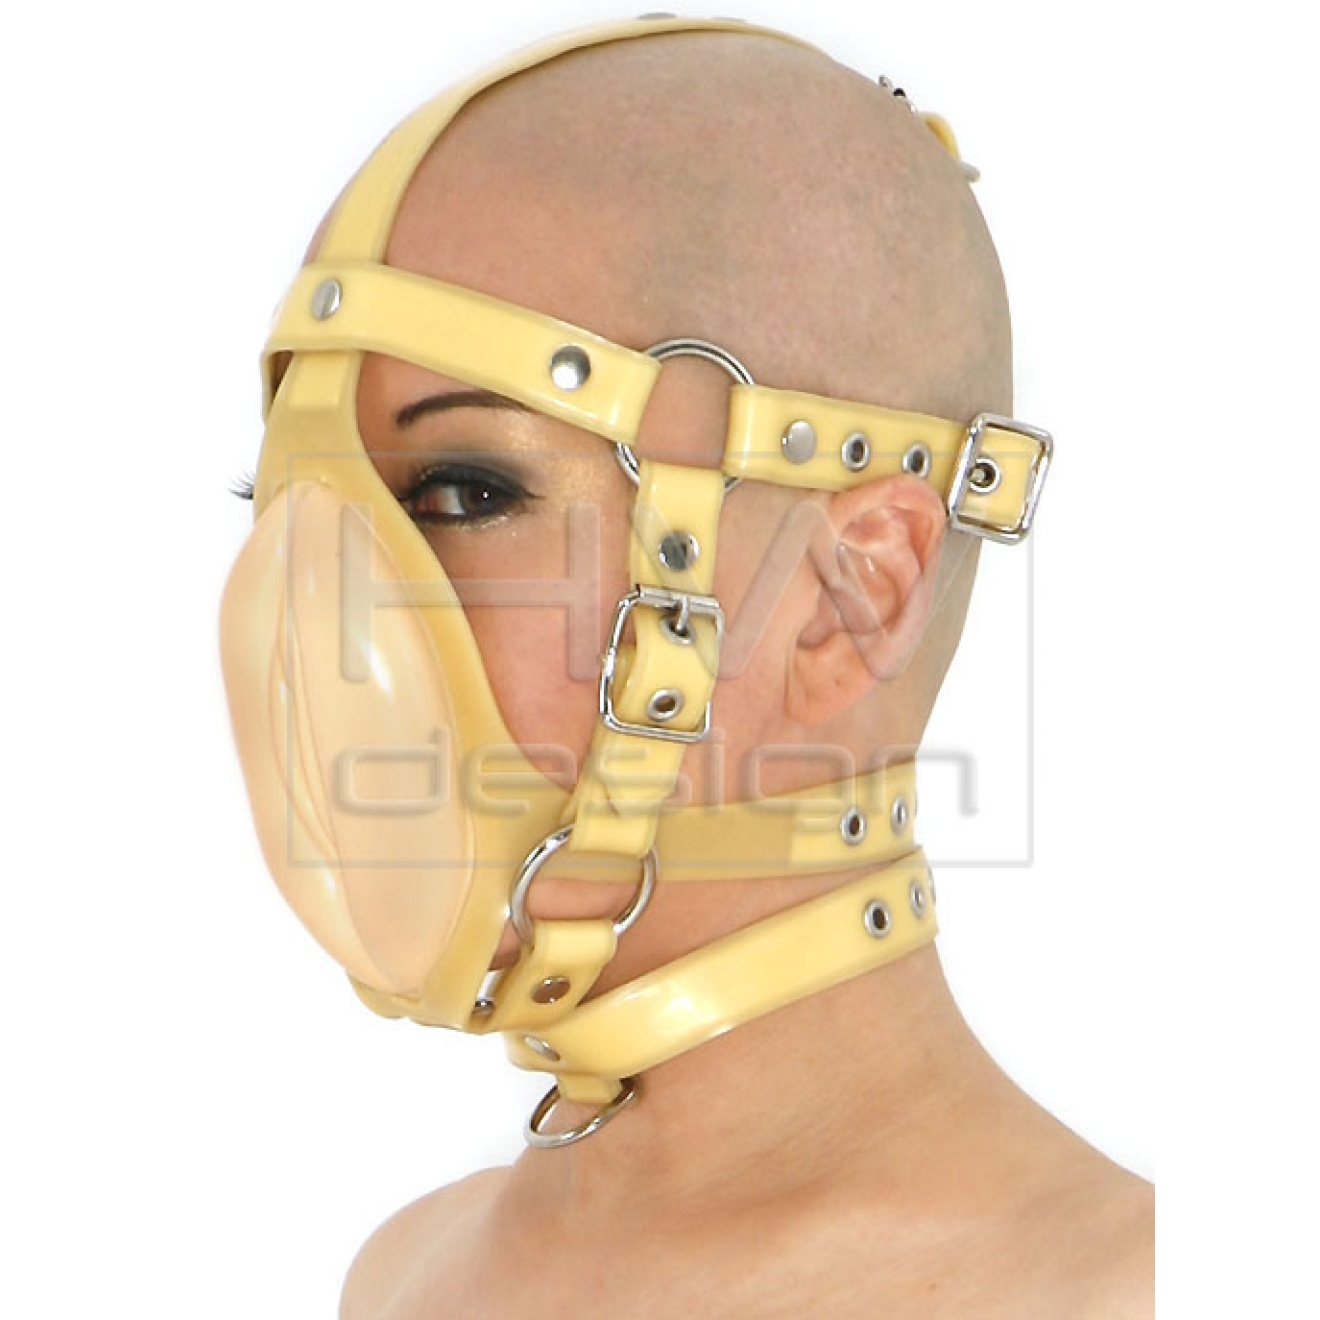 Pussy Face Harness